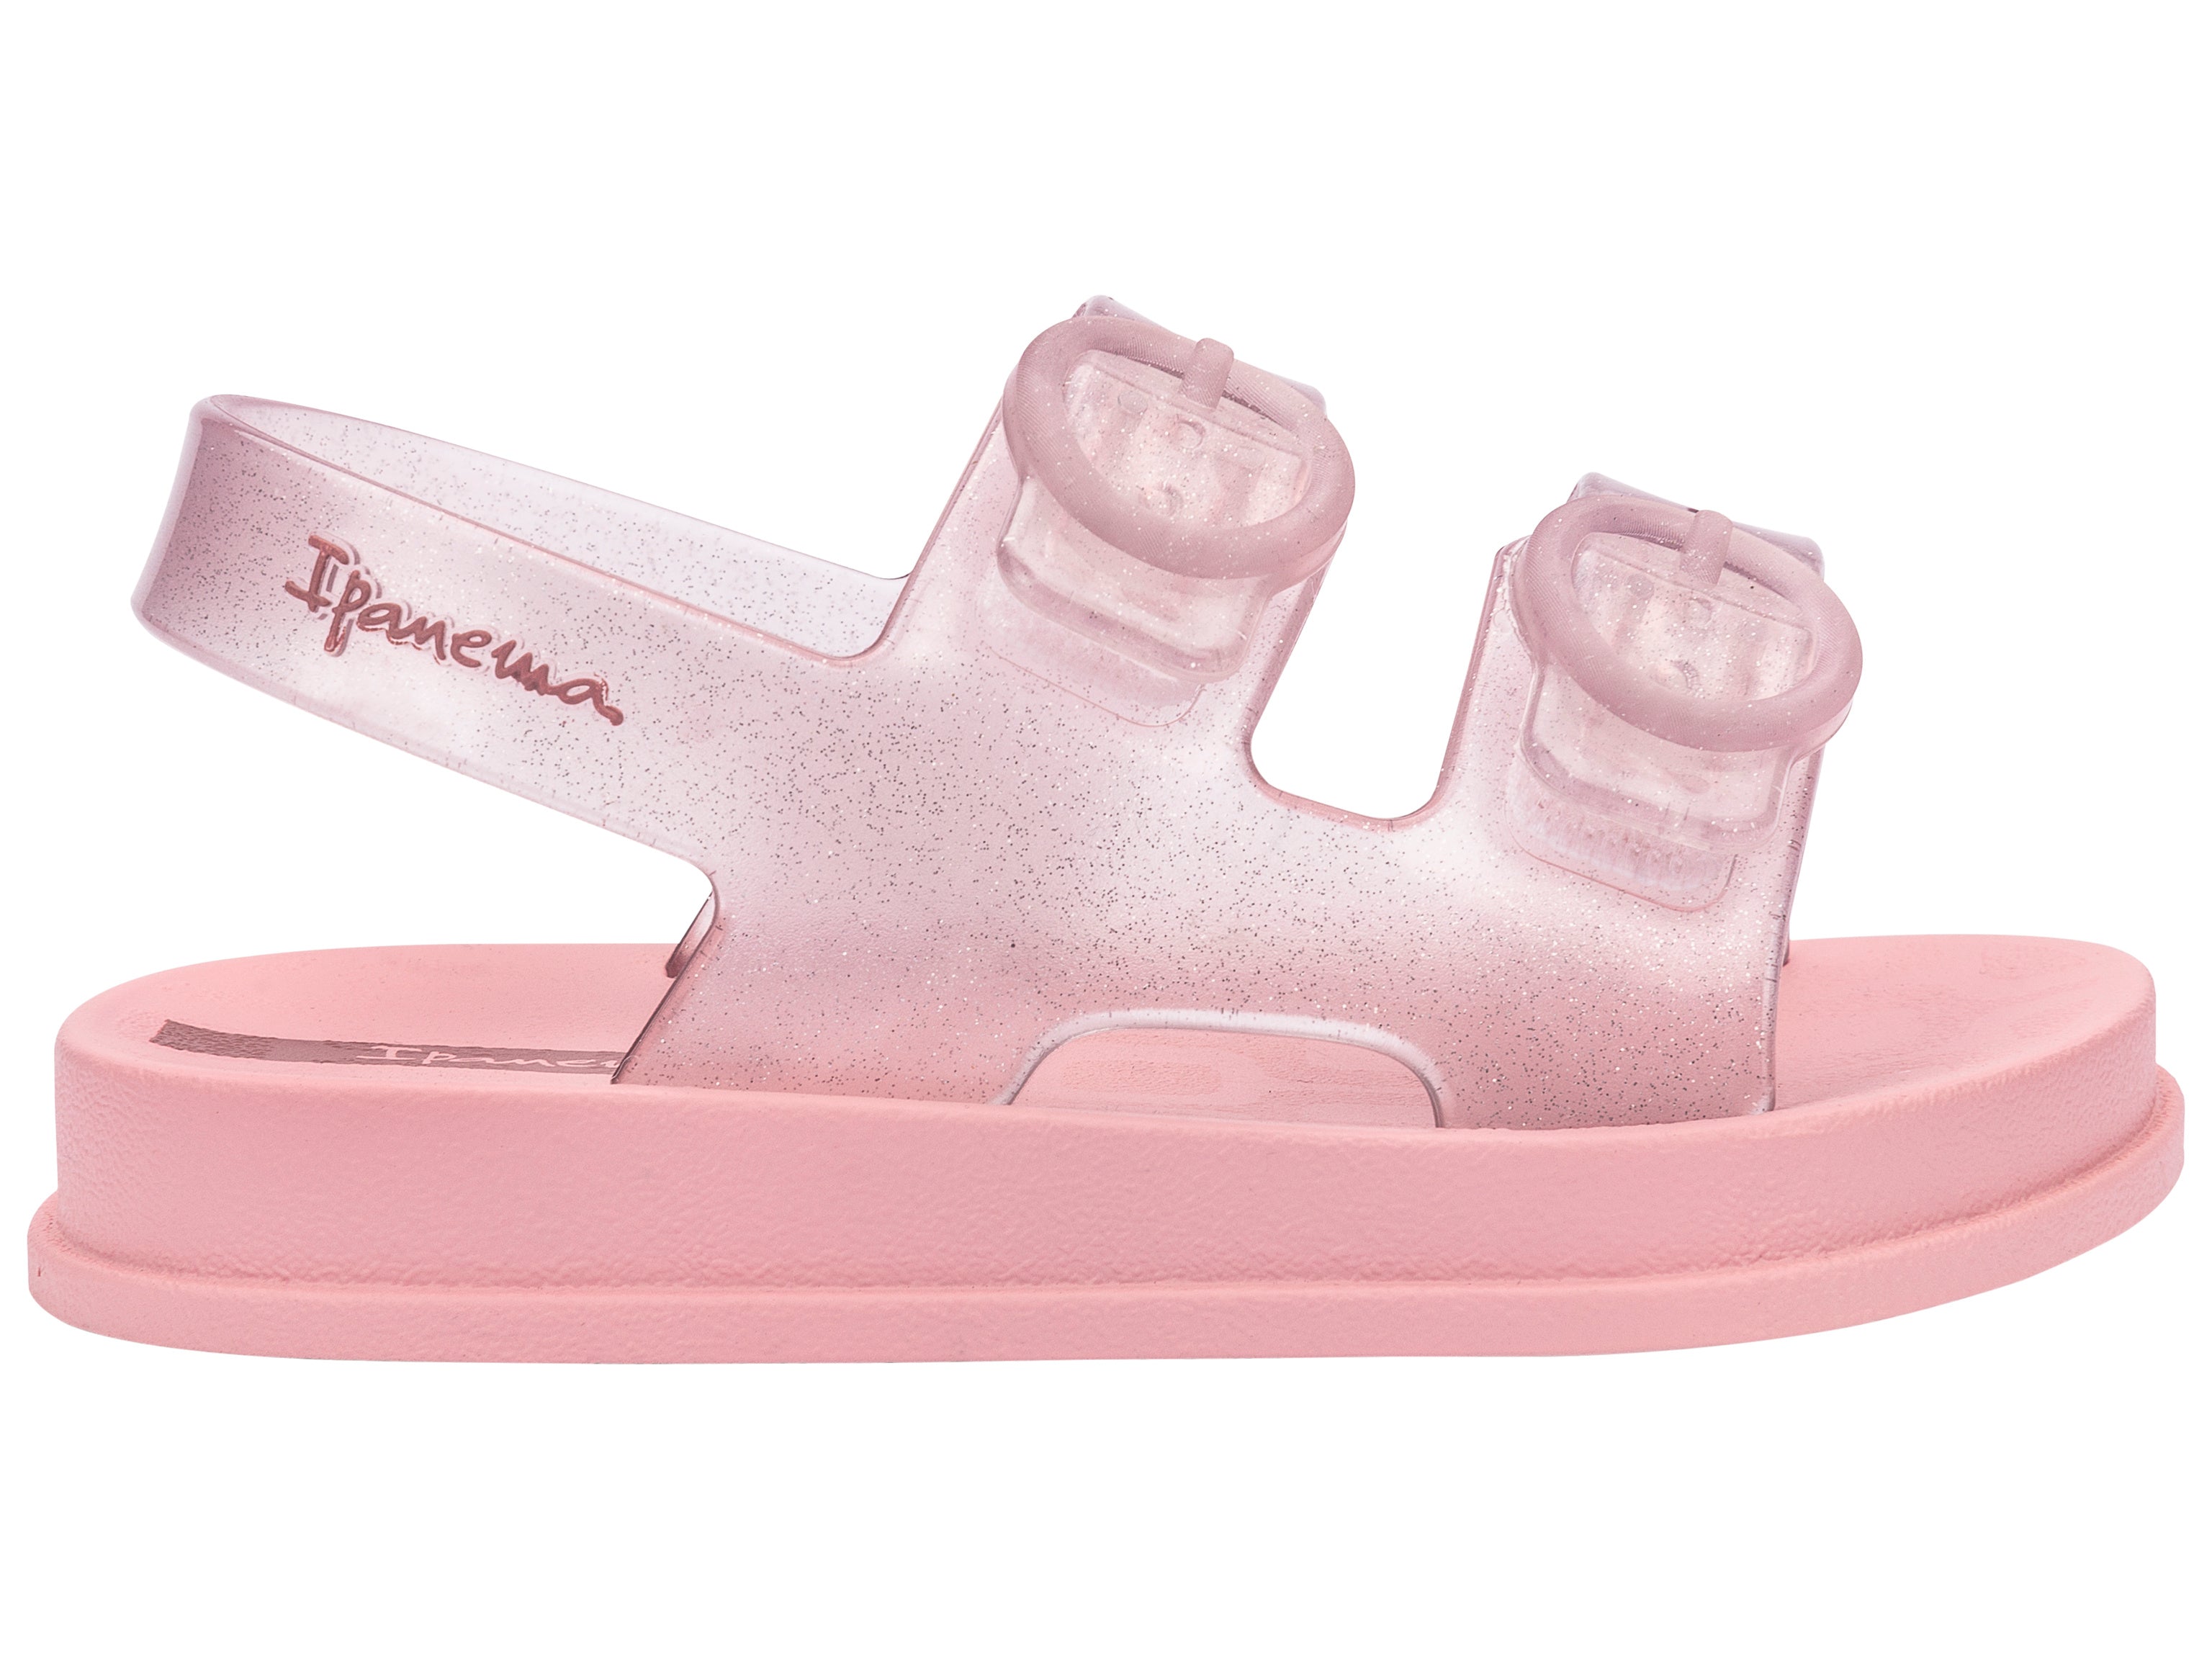 Outer side view of a light pink Ipanema Follow baby sandal with two decorative buckles on the upper.